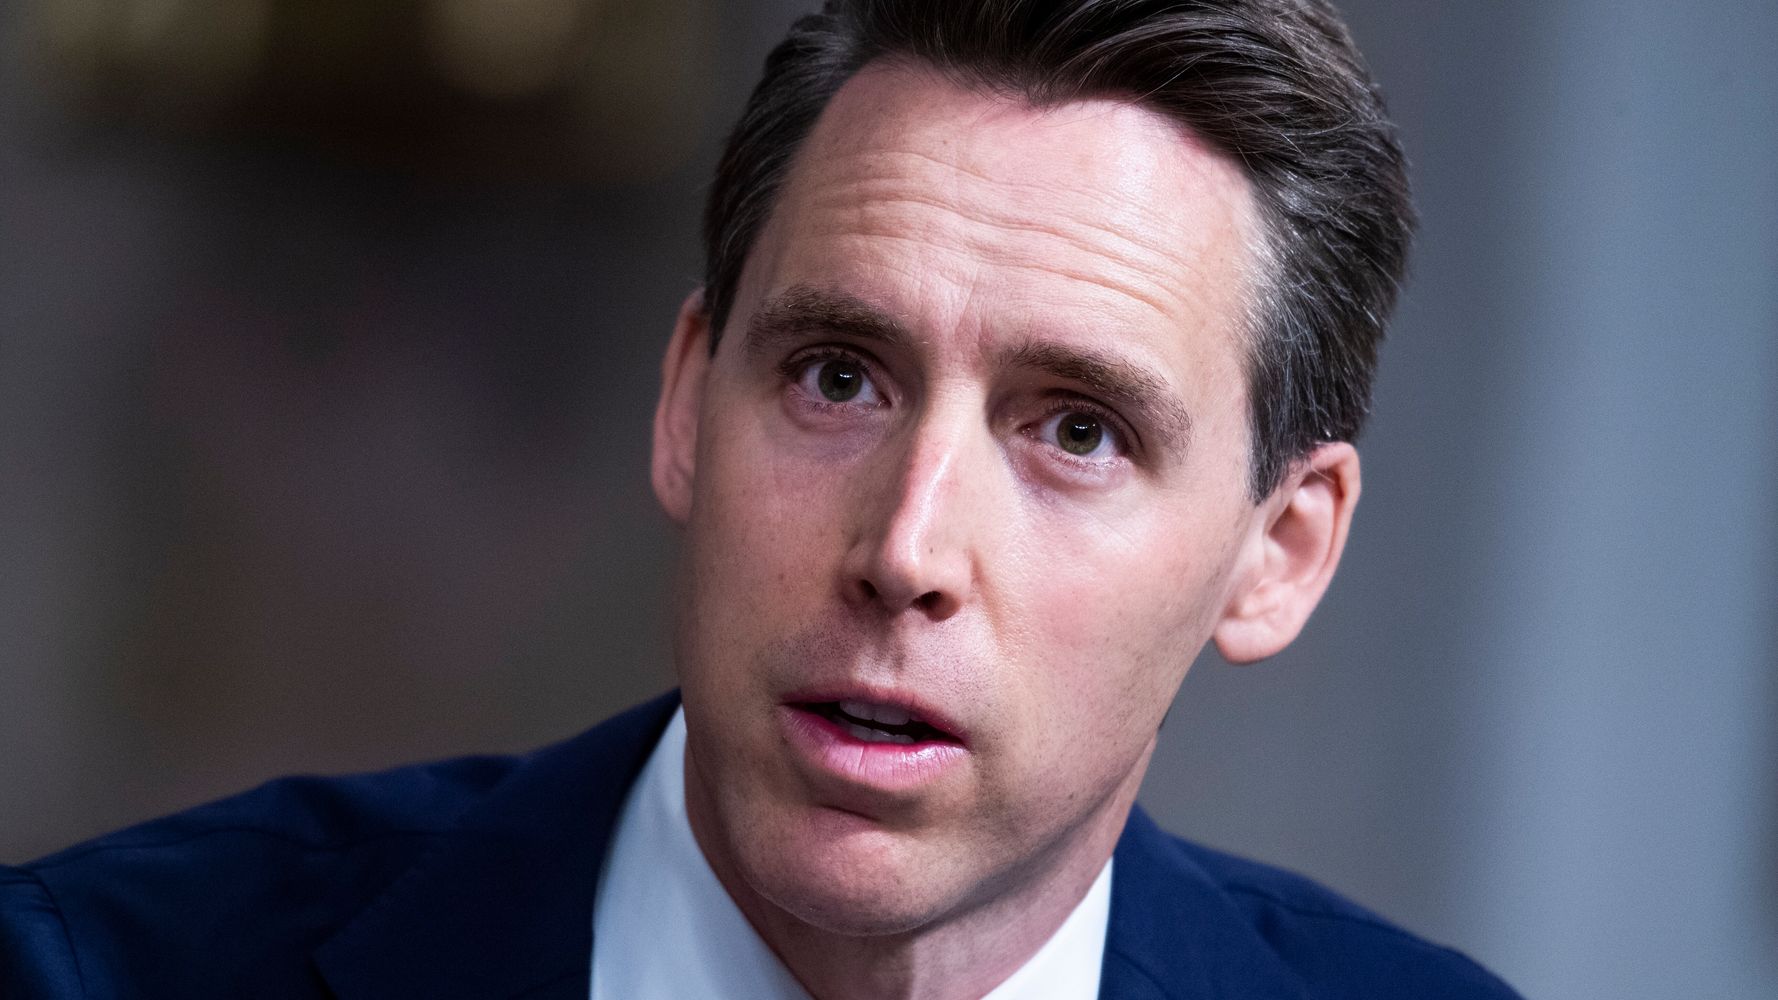 Twitter Users Drag Josh Hawley For Hypocritical Tweet About Amazon